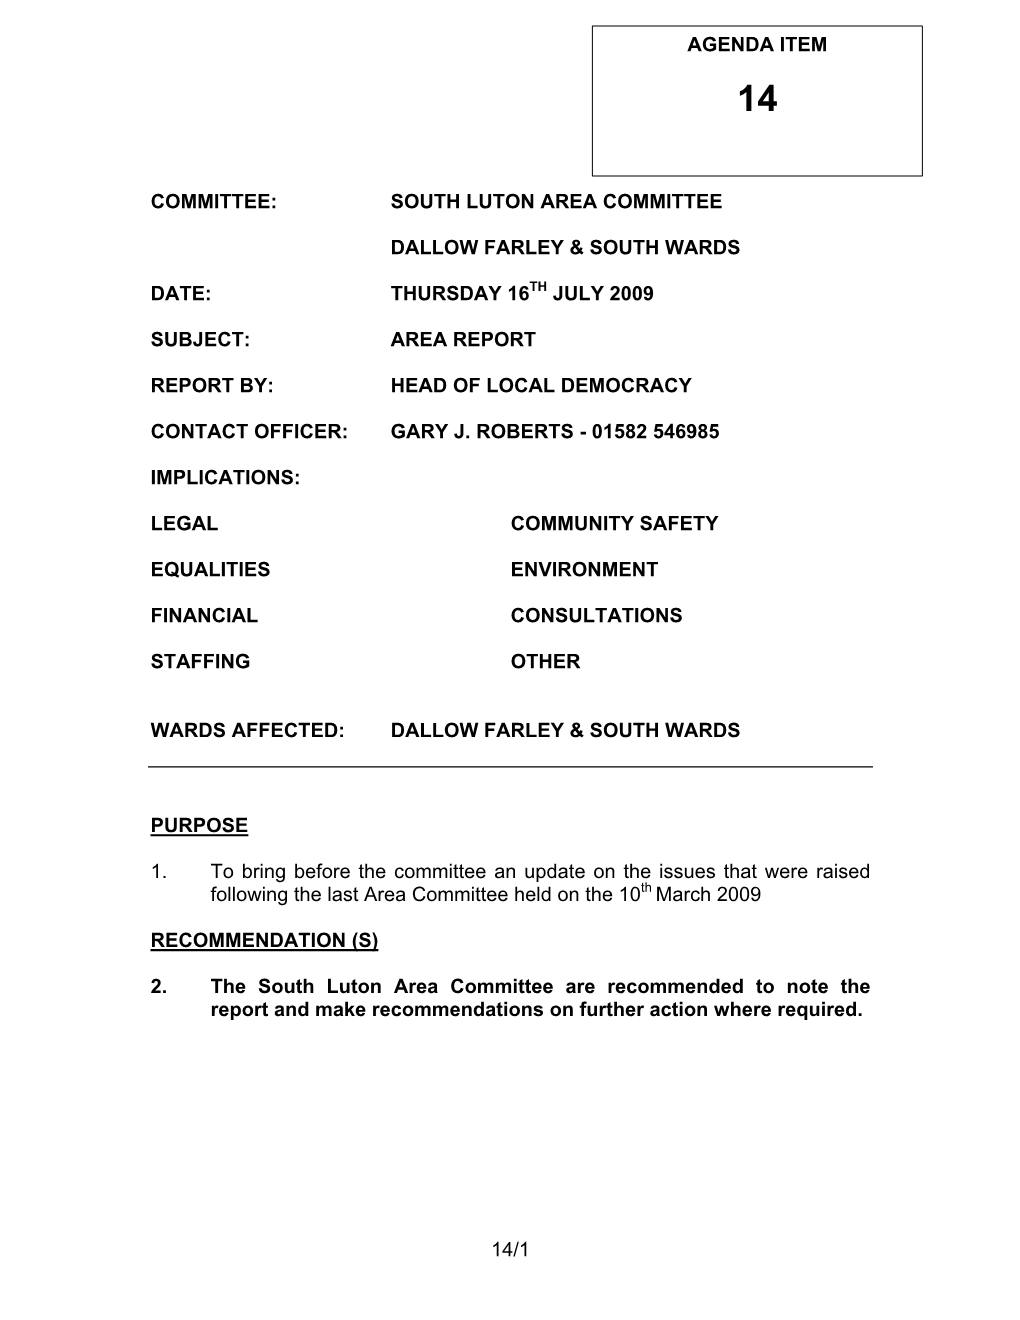 South Luton Area Committee Dallow Farley & South